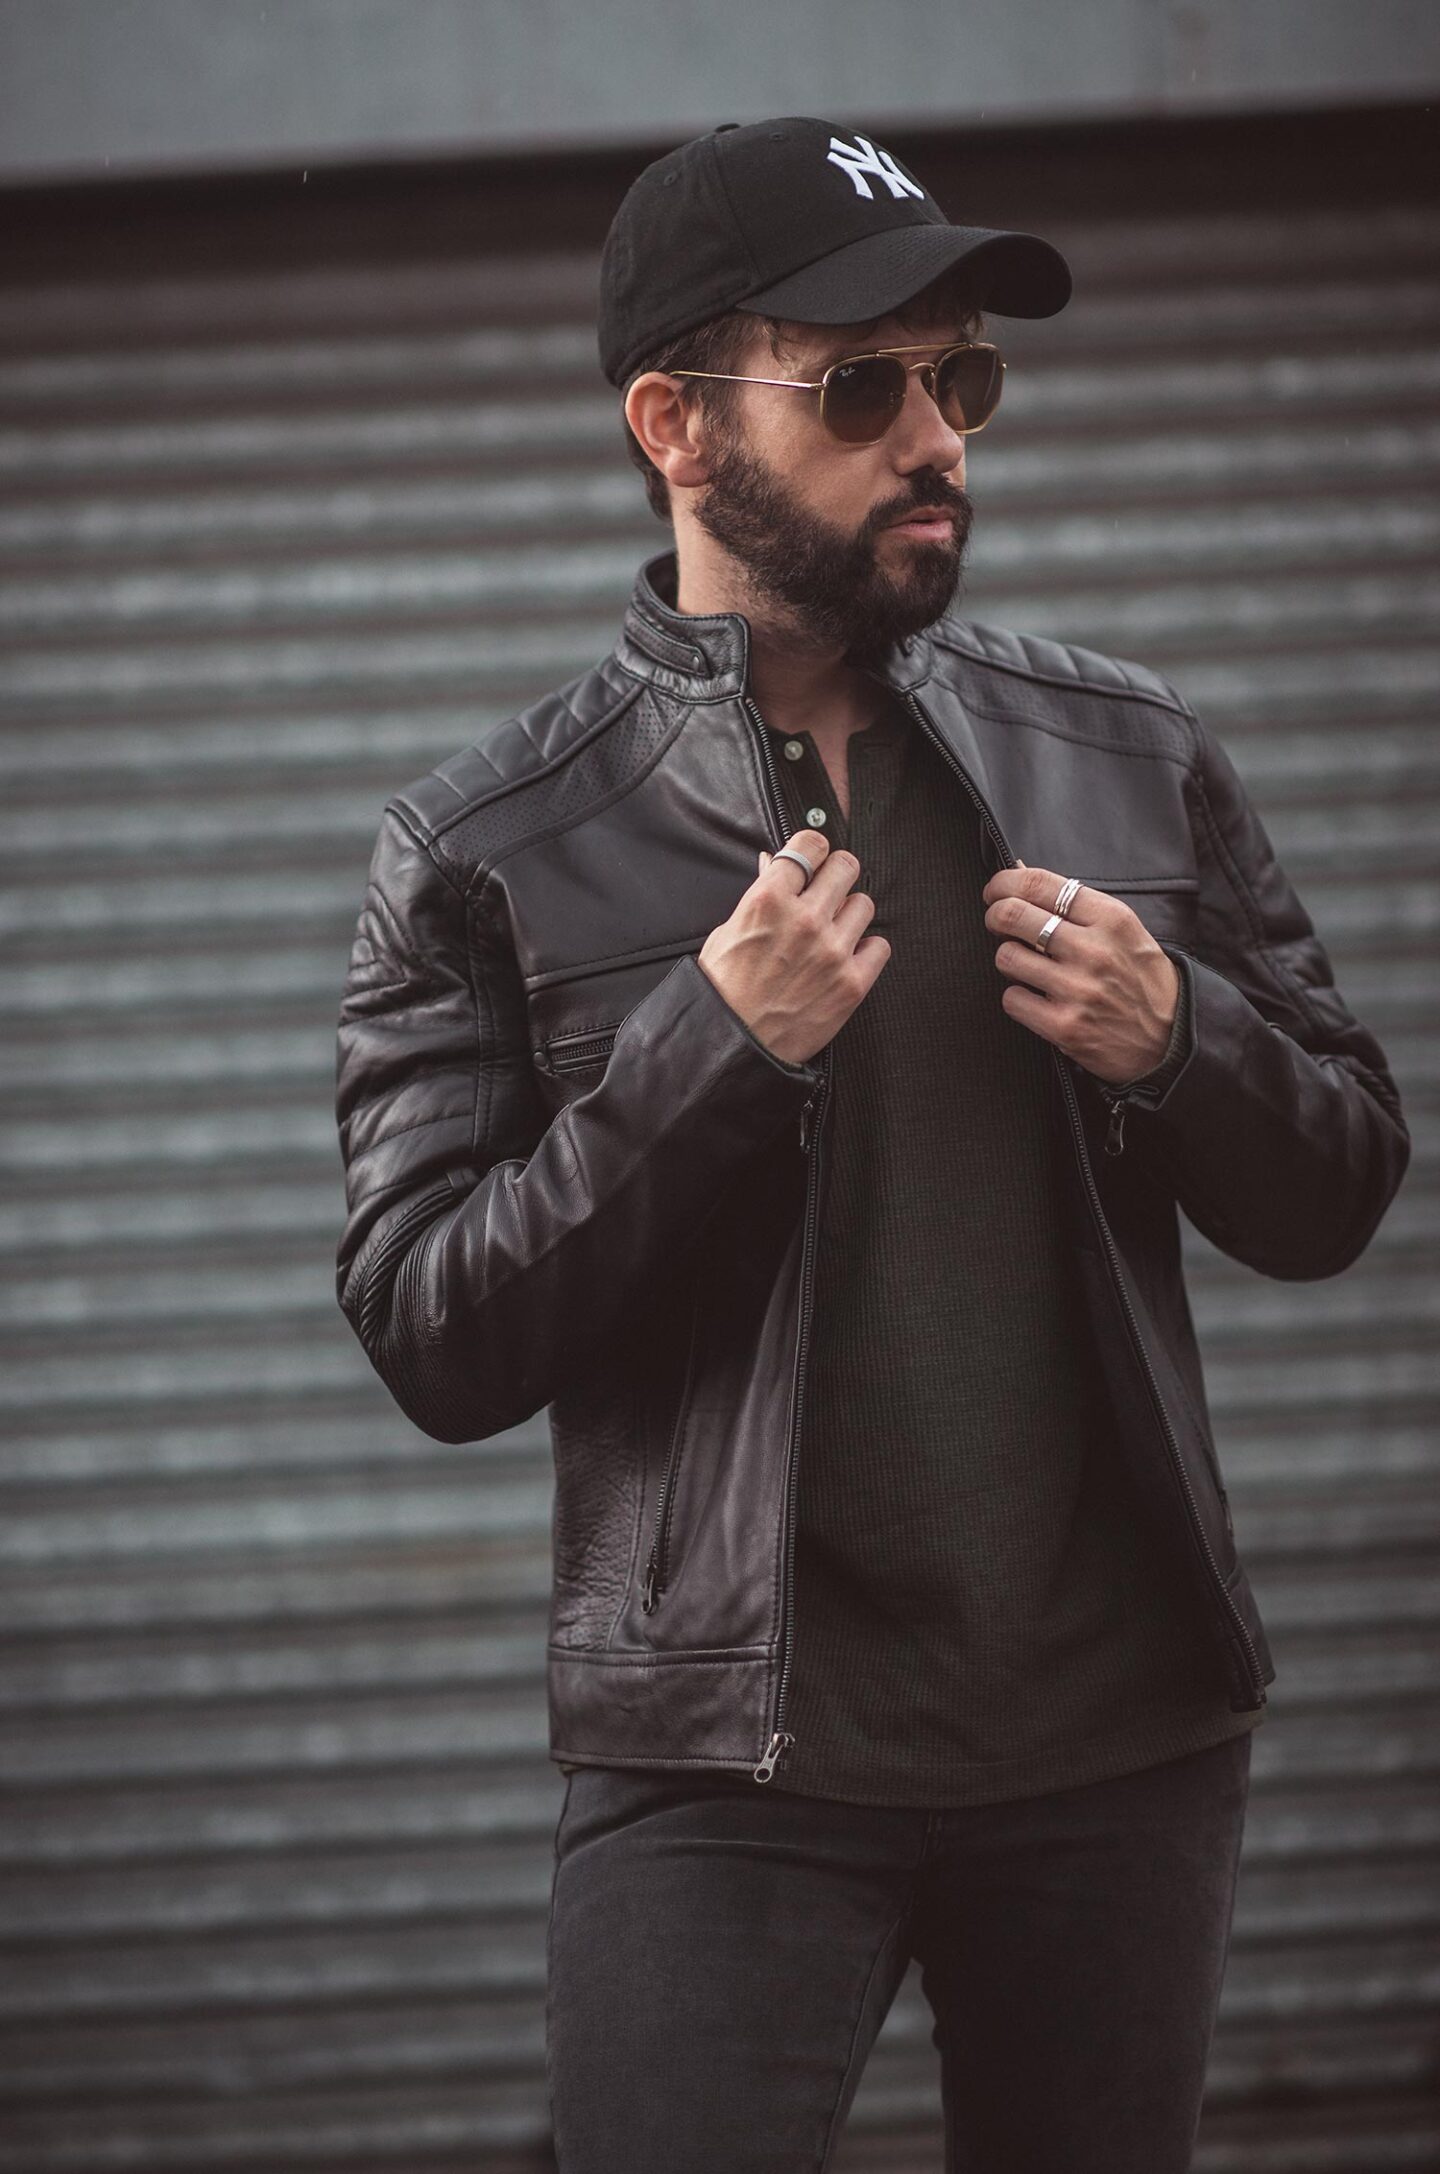 F Jackets Cafe Racer Leather Jacket Review - Your Average Guy